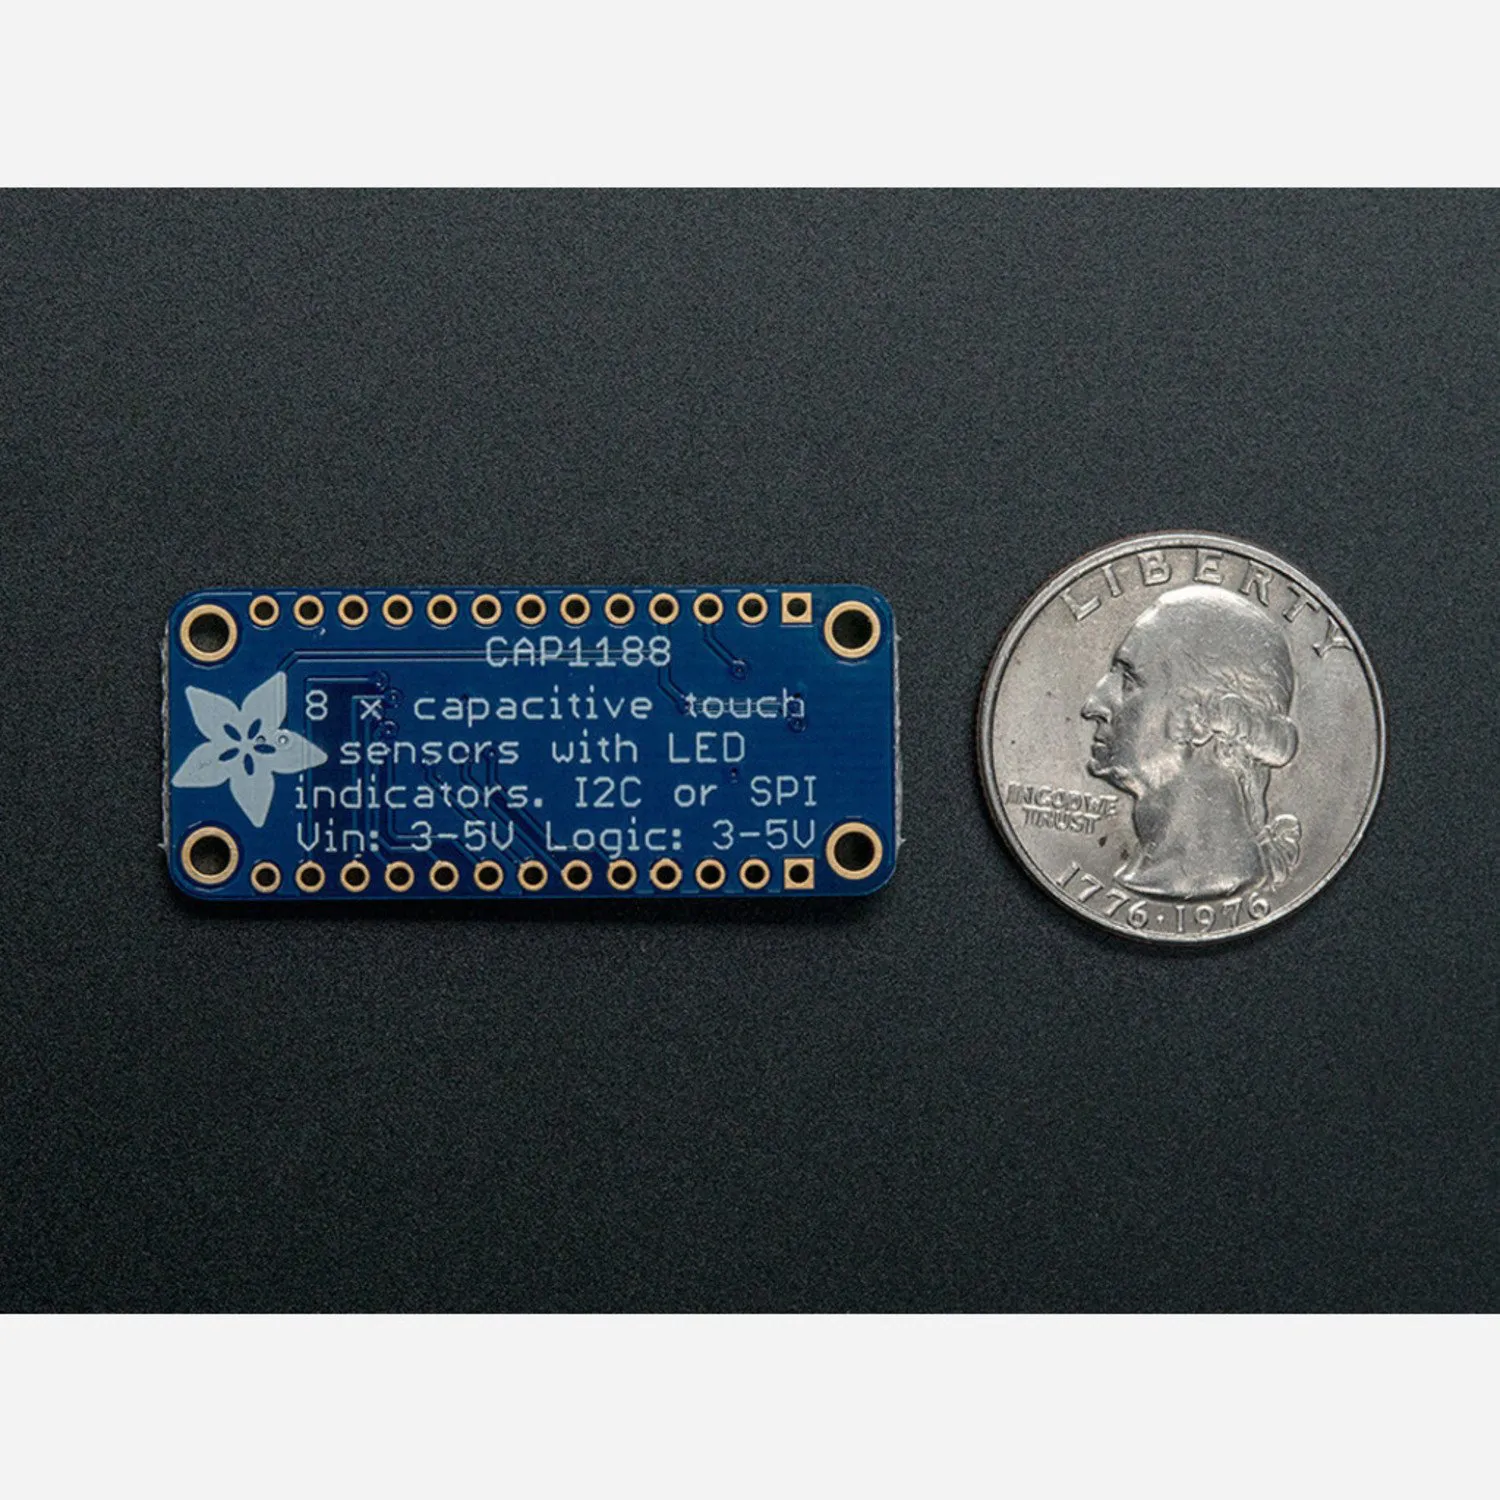 Photo of CAP1188 - 8-Key Capacitive Touch Sensor Breakout - I2C or SPI